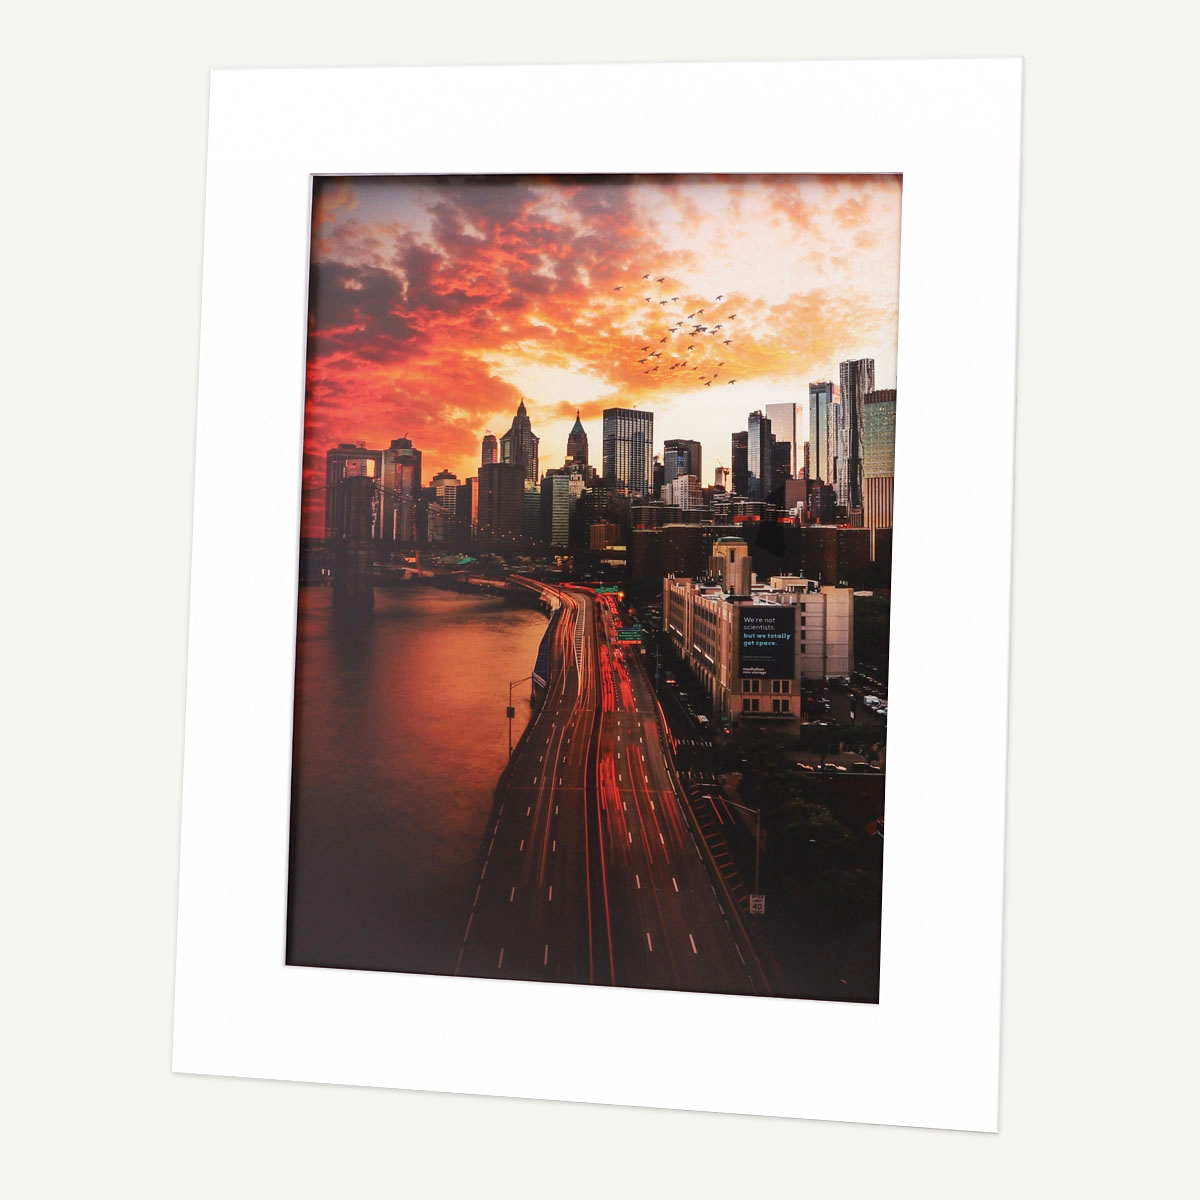 Golden State Art,14x18 Pre-cut Mat with Whitecore fits 11x14 Picture